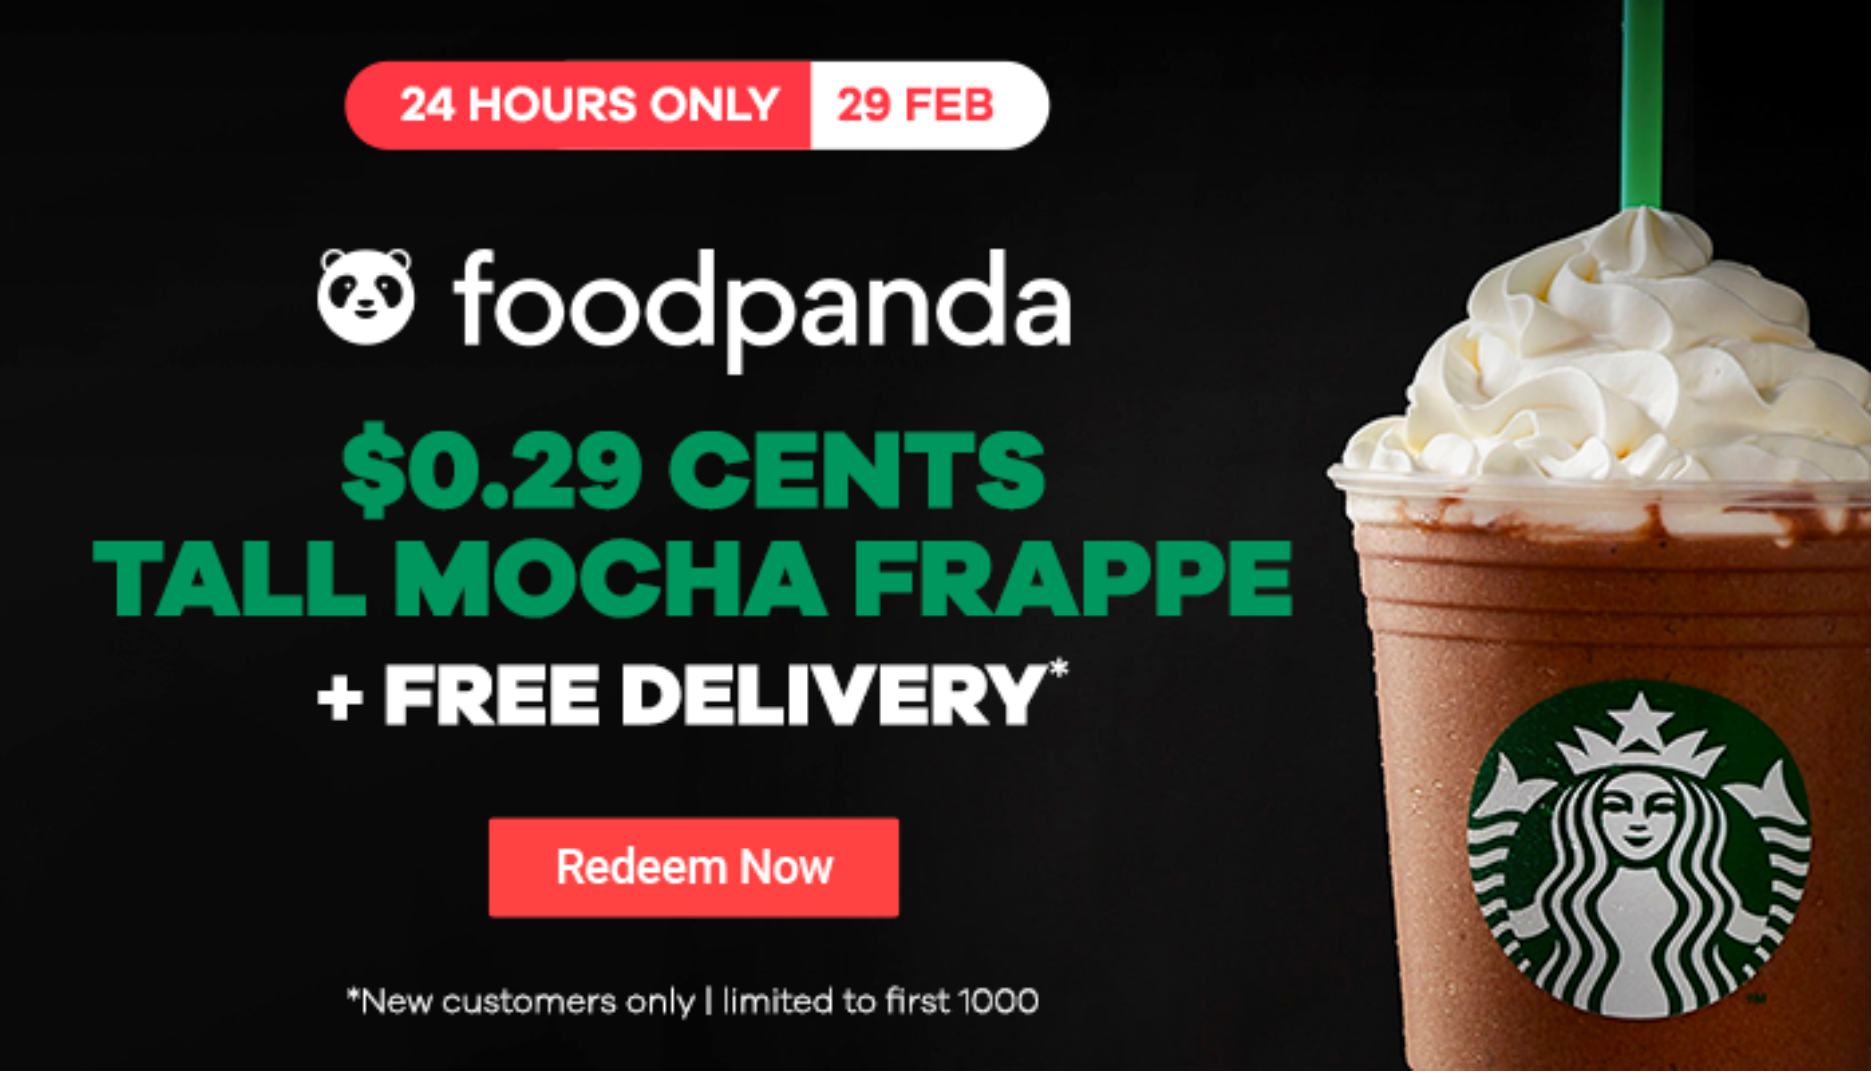 0.29 Starbucks, 2.90 Vouchers, And Other Leap Year Special Deals